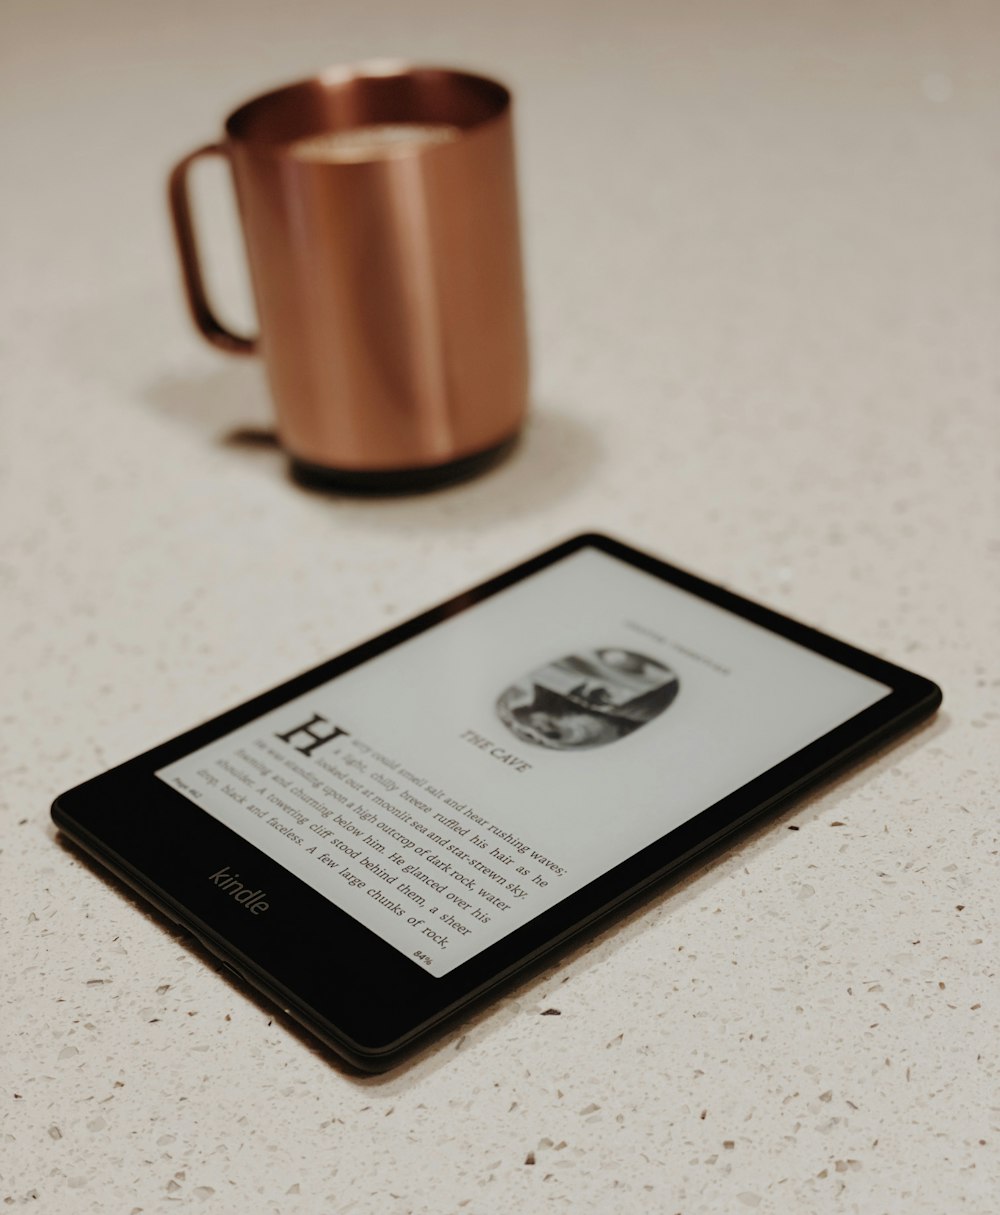 a tablet sitting on a table next to a coffee mug